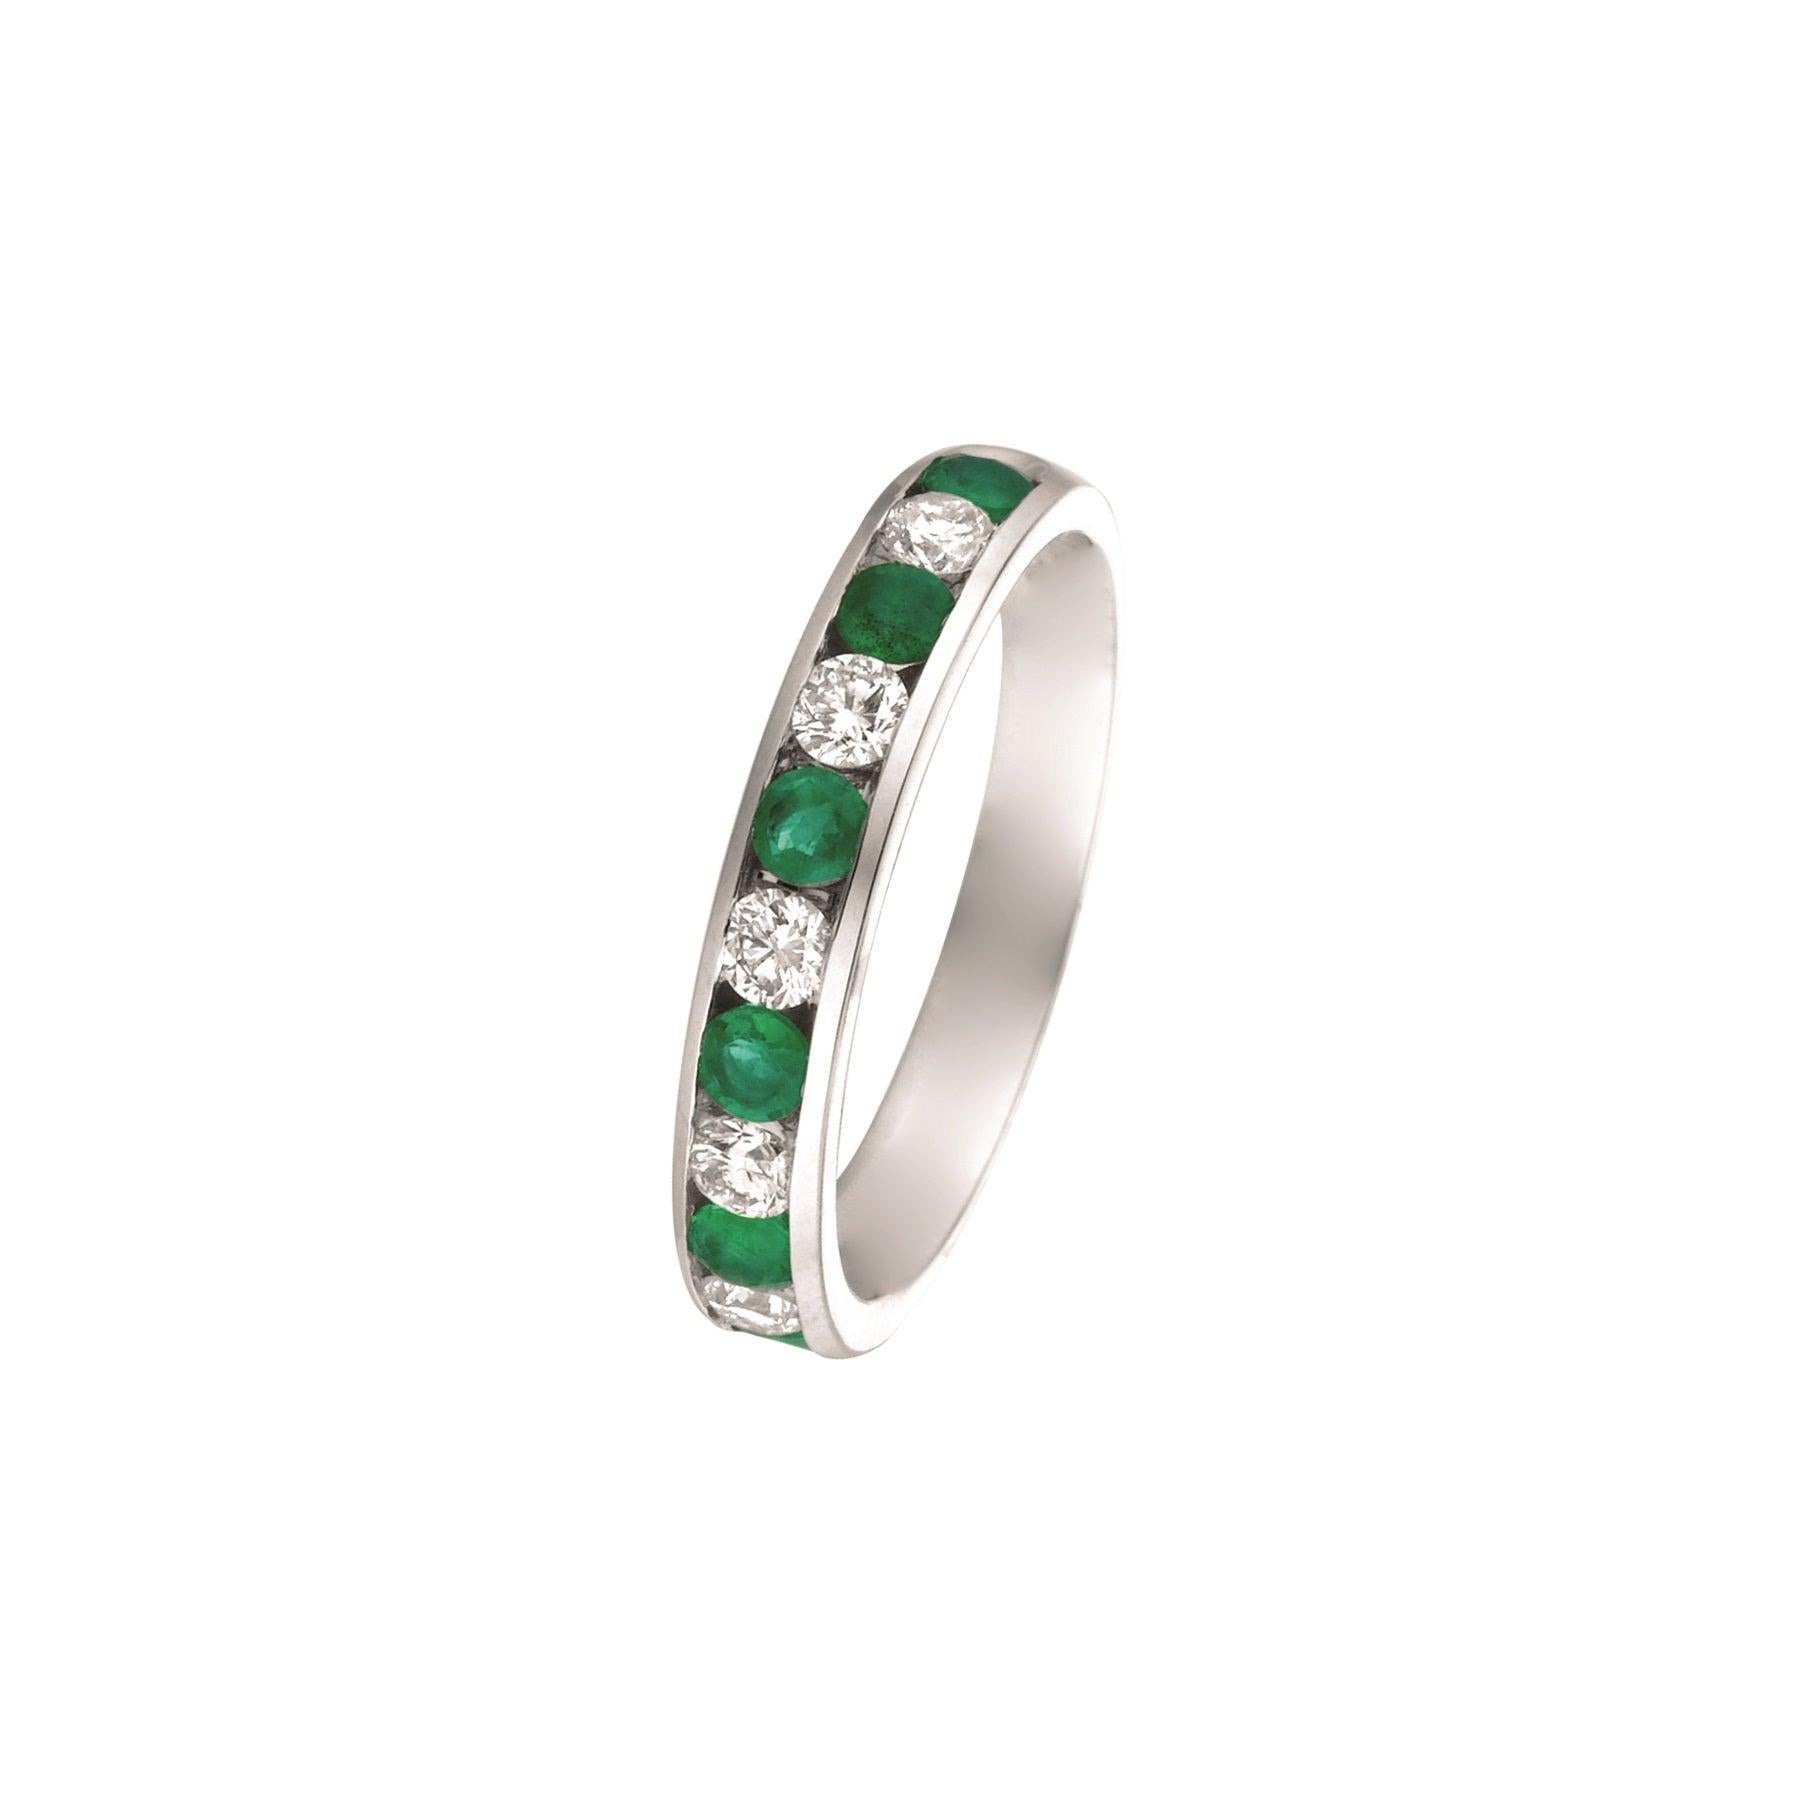 For Sale:  0.80 Carat Natural Emerald and Diamond Ring 14 Karat White Gold 2